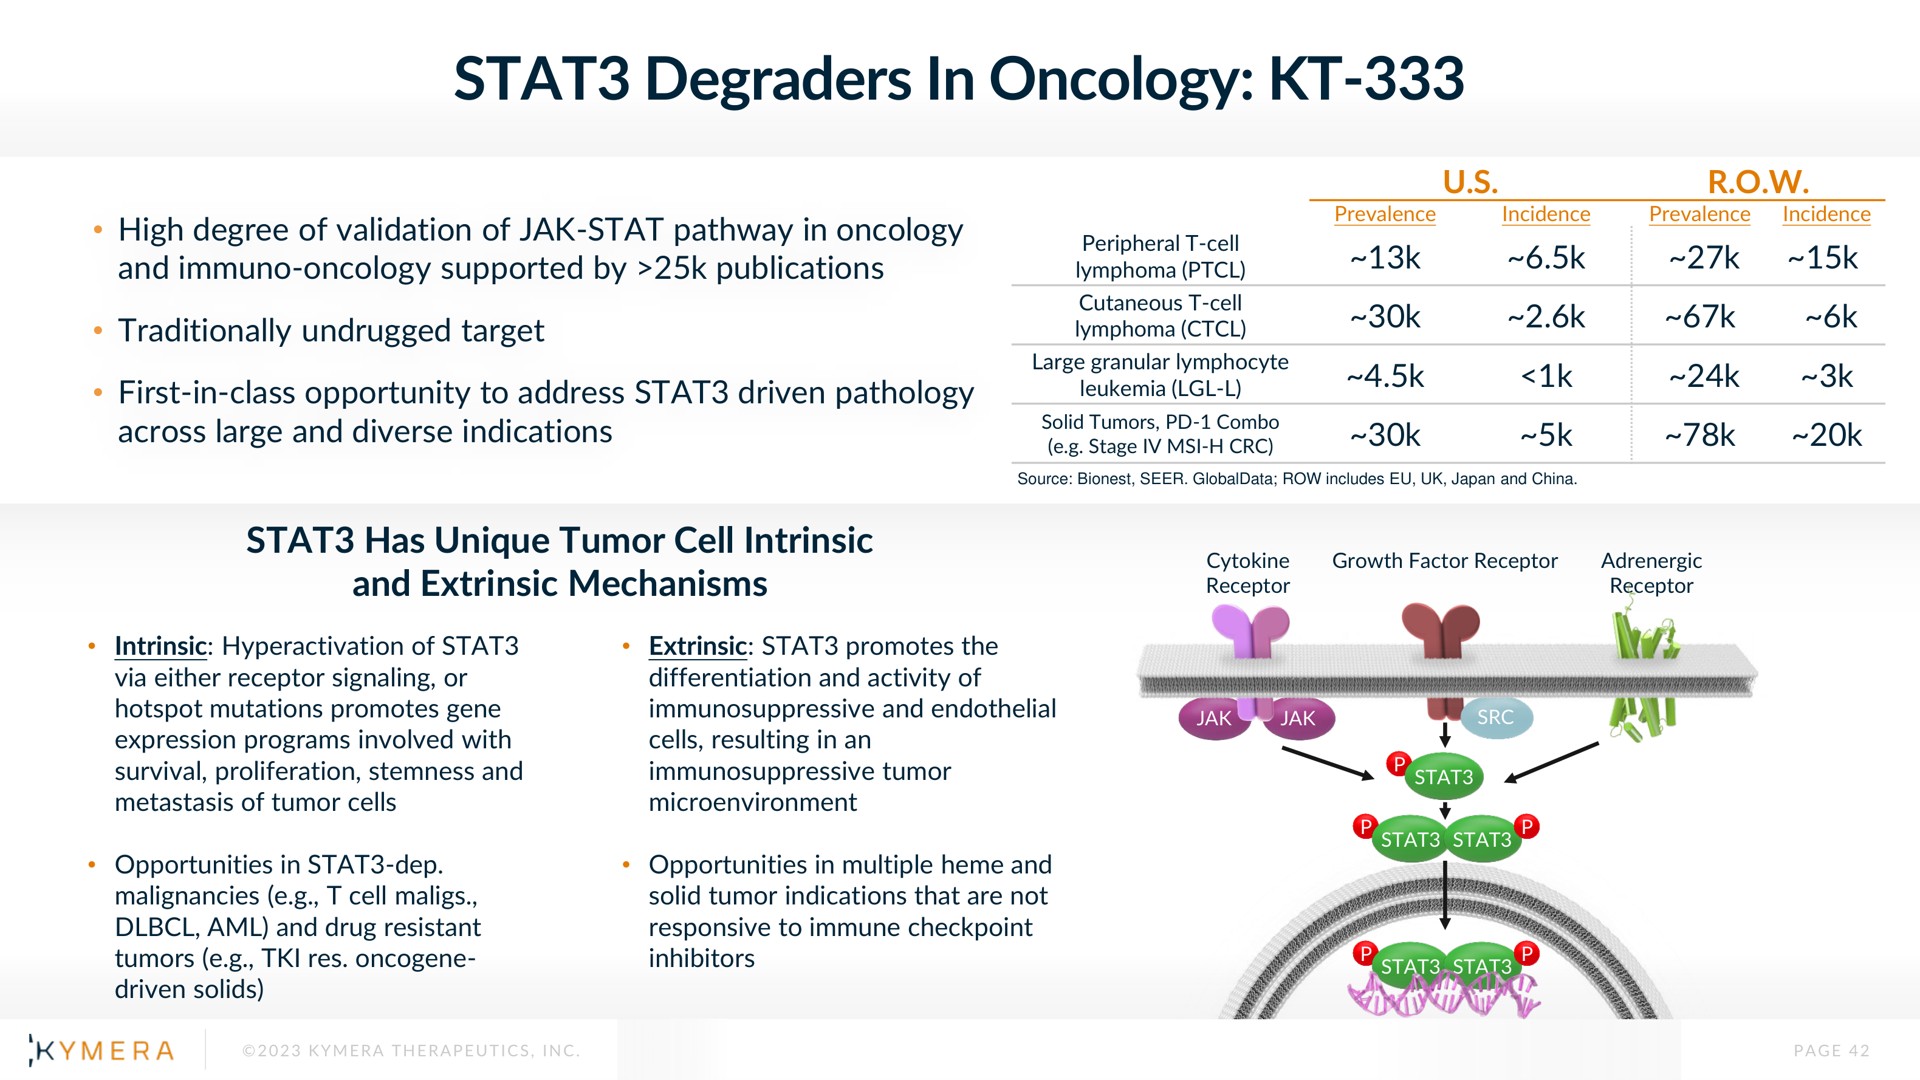 degraders in oncology | Kymera